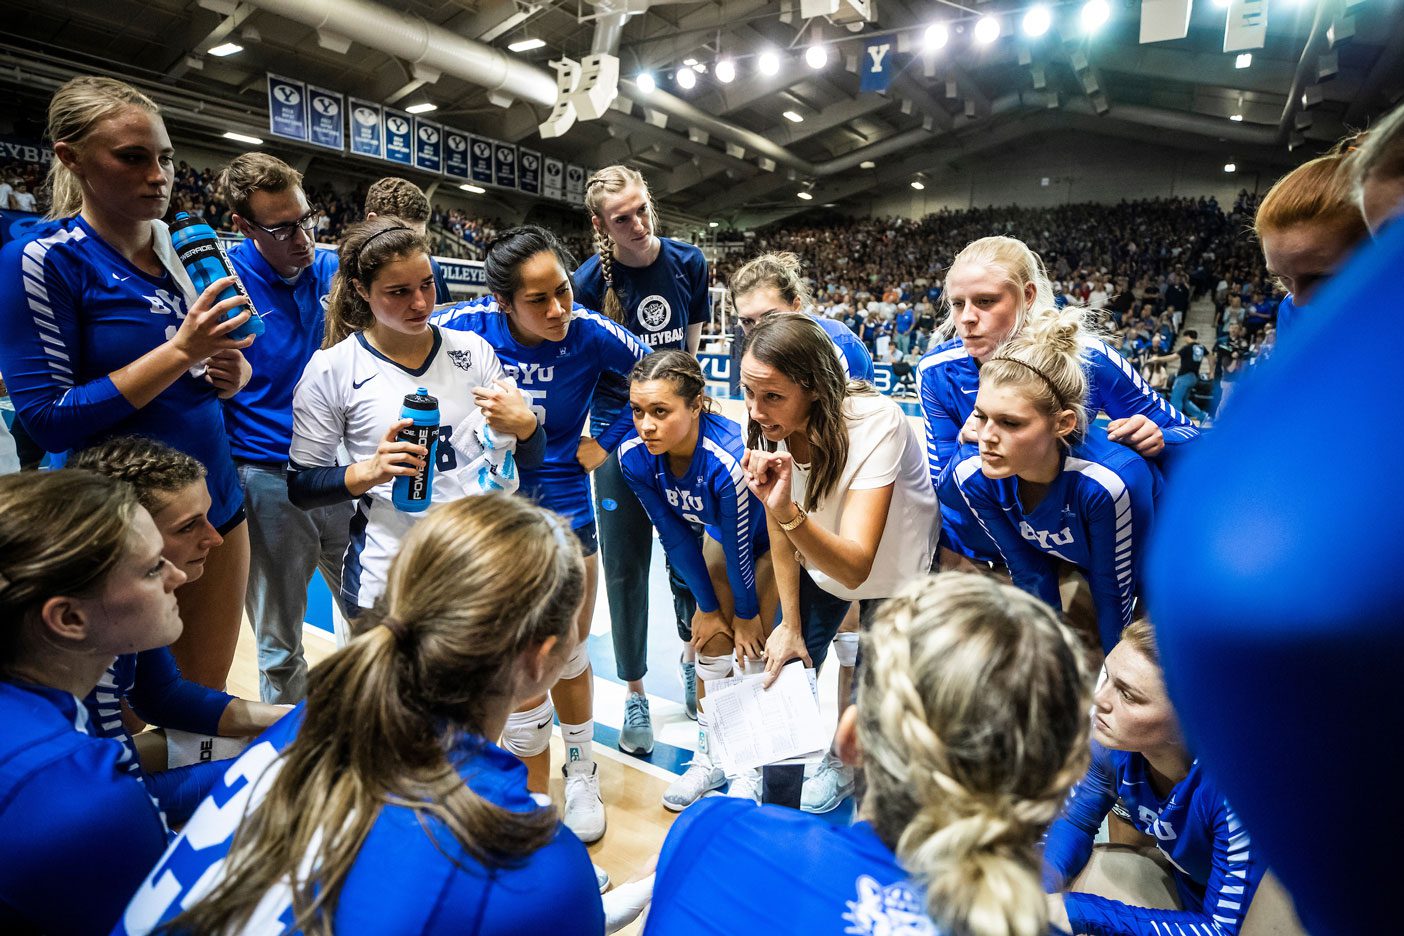 2018 BYU Women's Volleyball Team huddles during a game with Utah